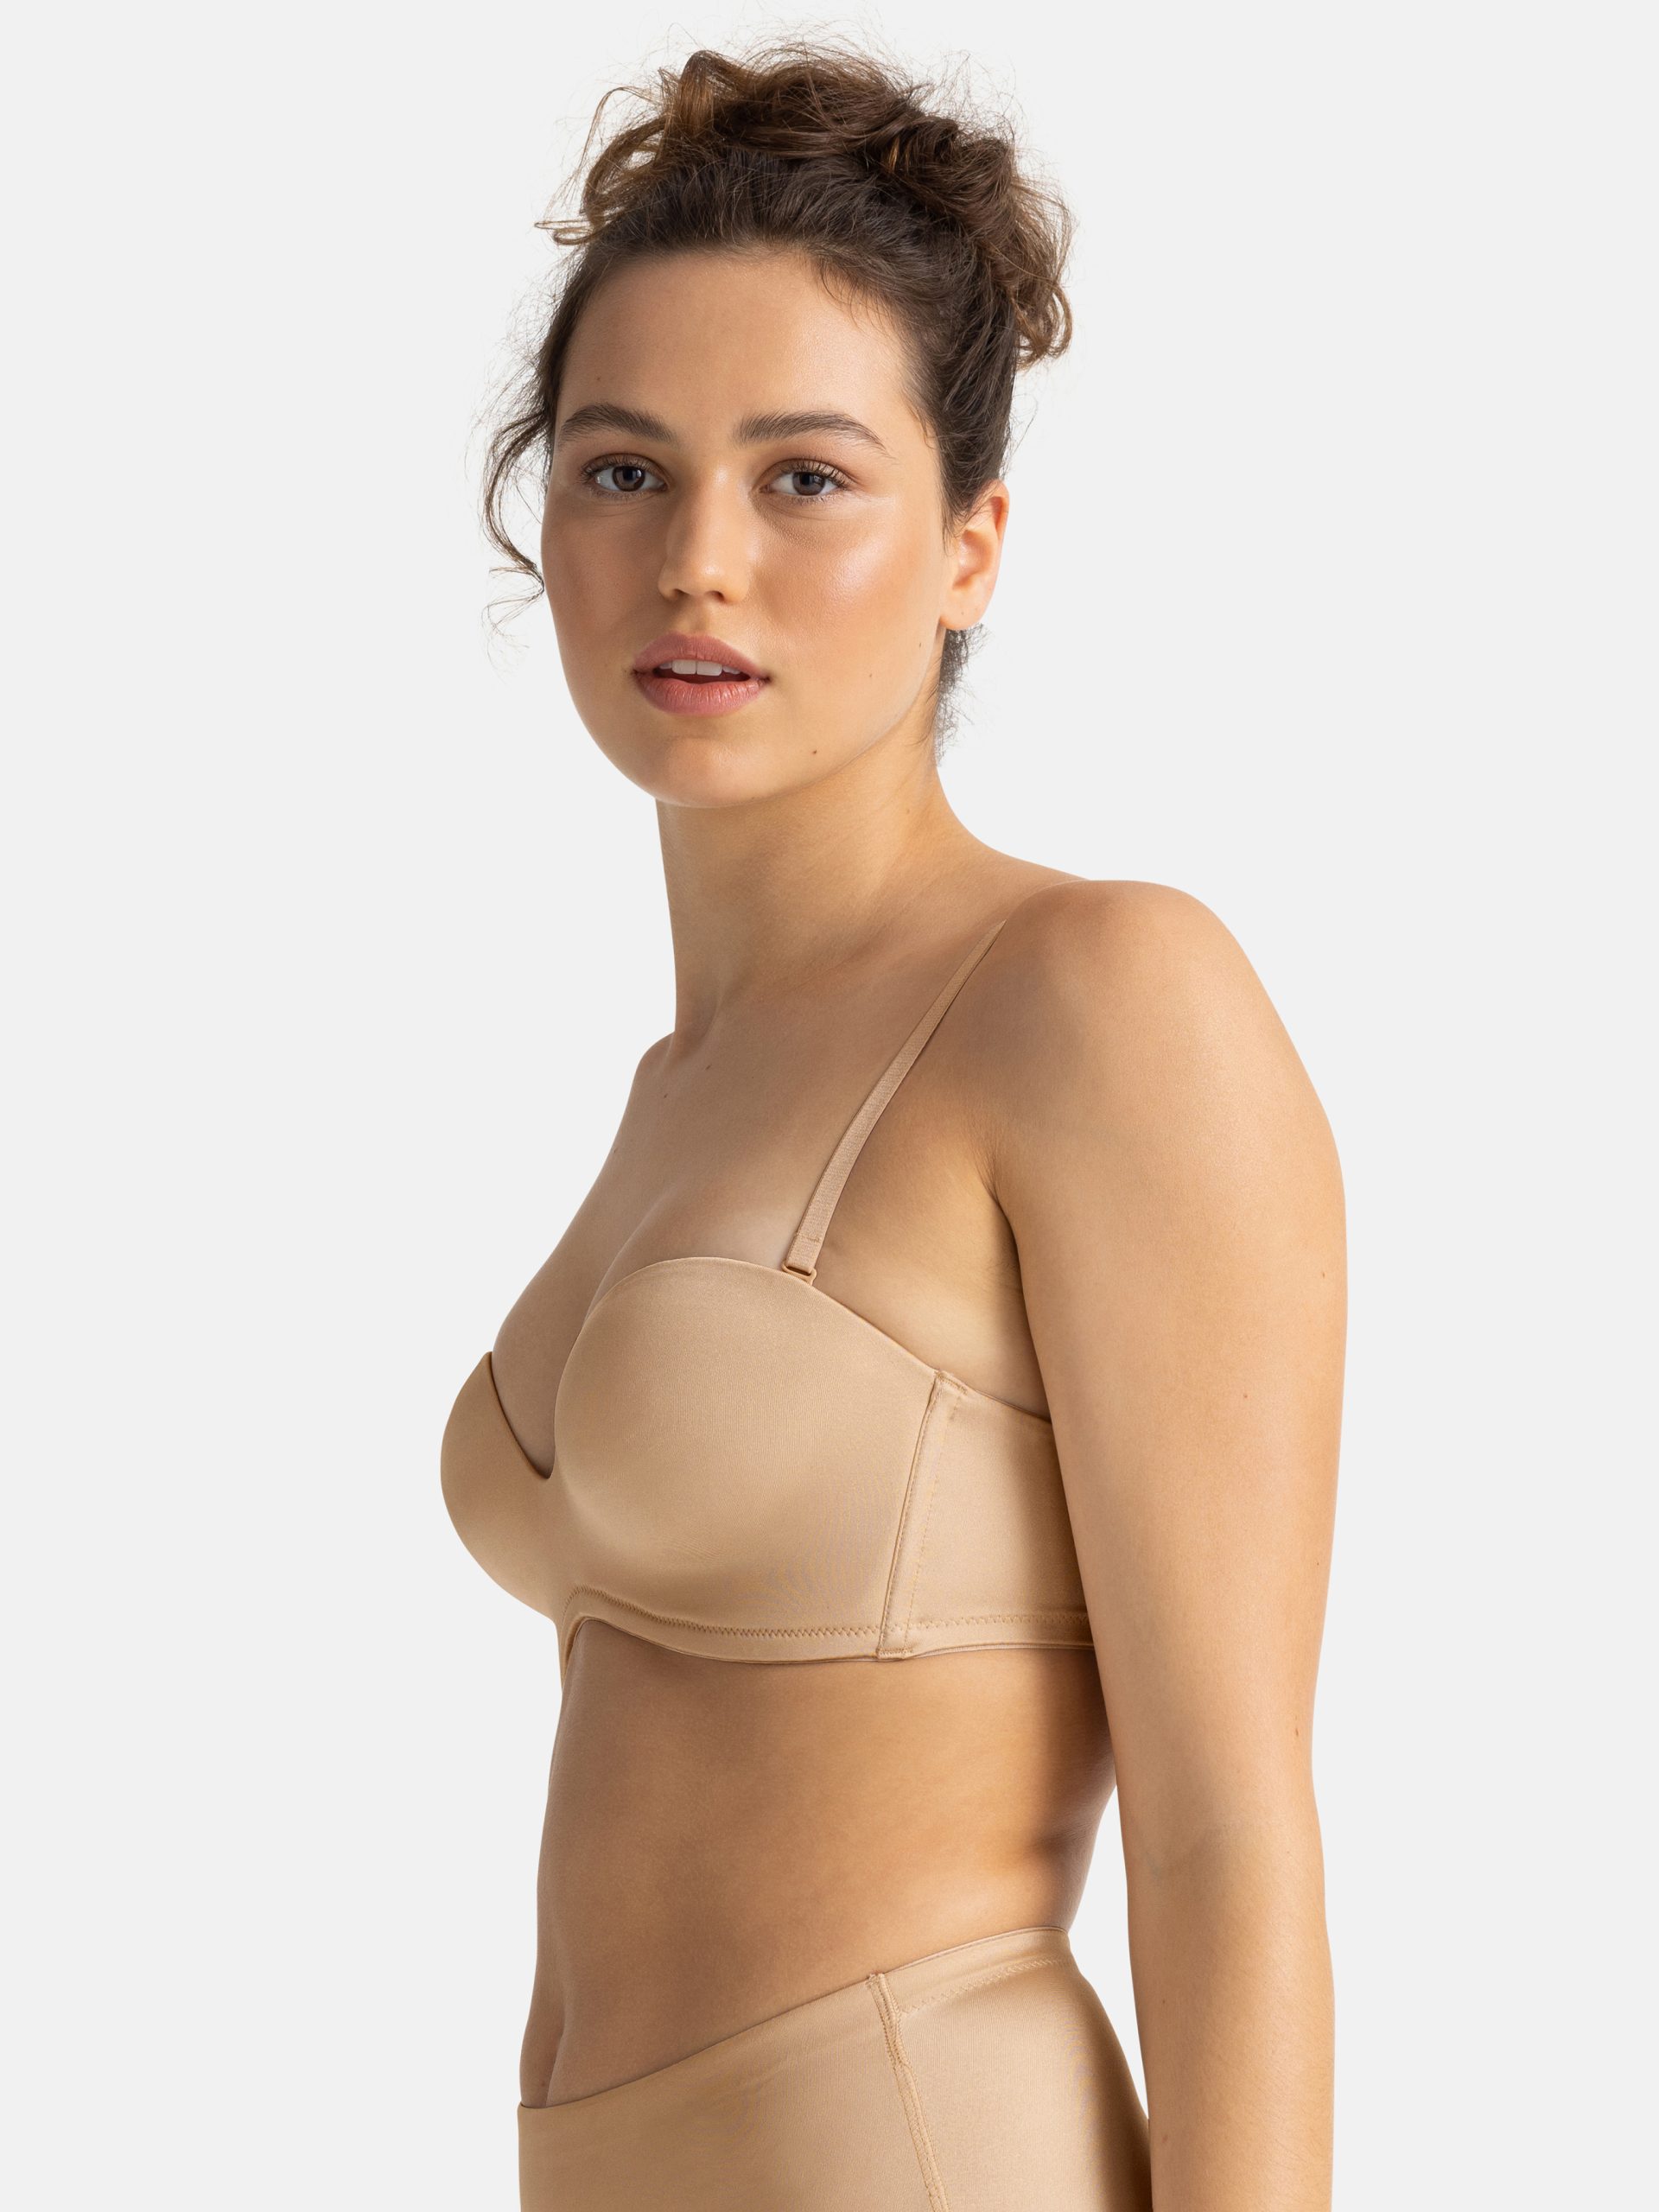 Buy GLAMORAS Women's Nylon blend Padded Wire Free Silky Smooth Bandeau  Stretch Seamless Strapless Tube Top Bra, Removable Pads, Free Size, Beige  at